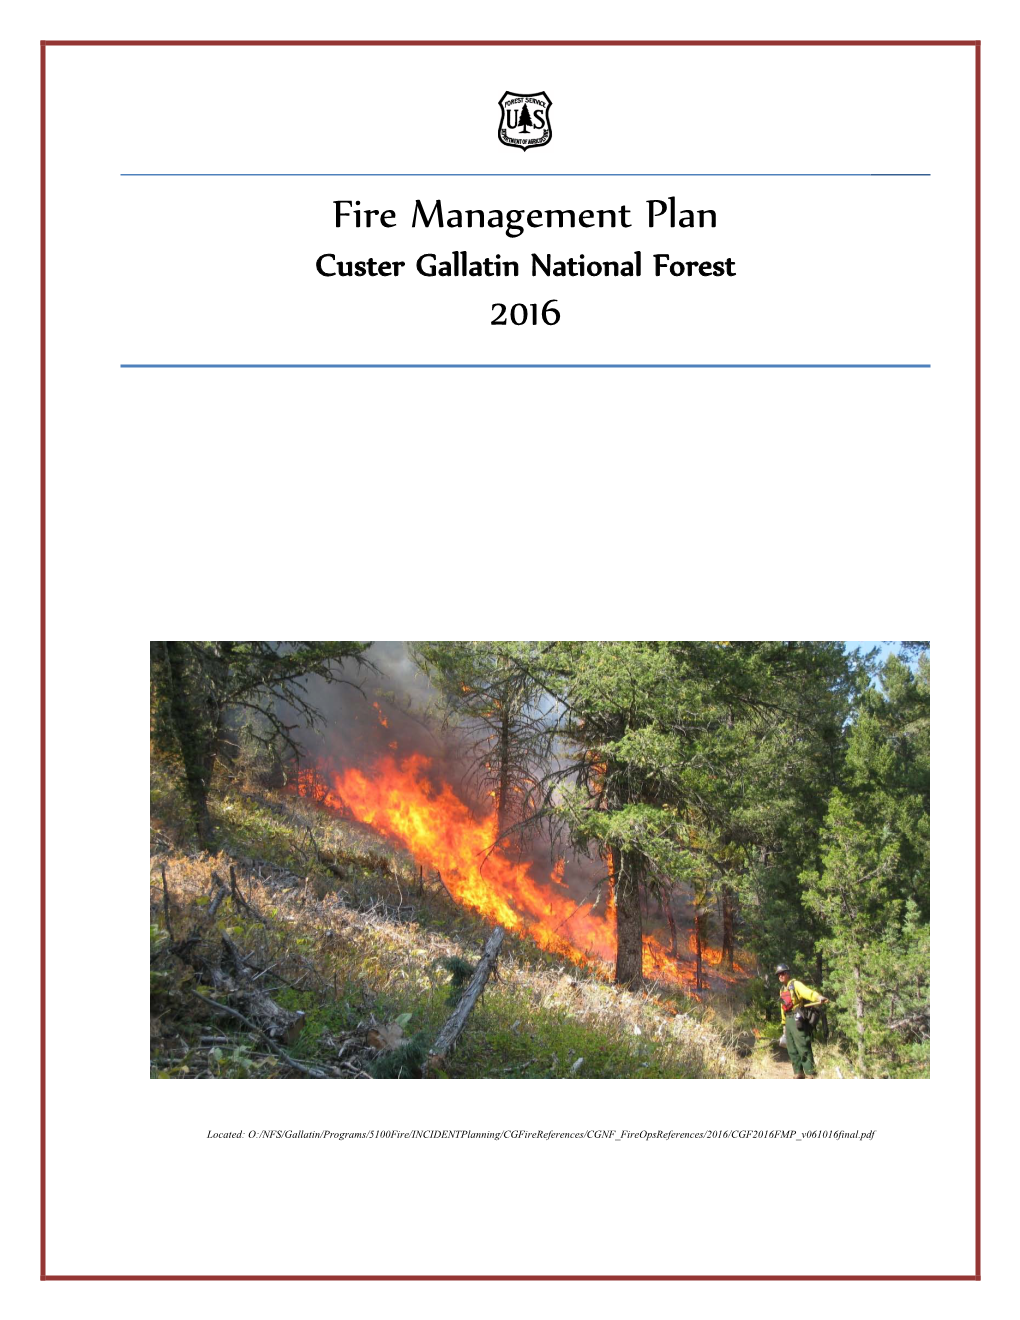 Fire Management Plan for the Gallatin National Forest